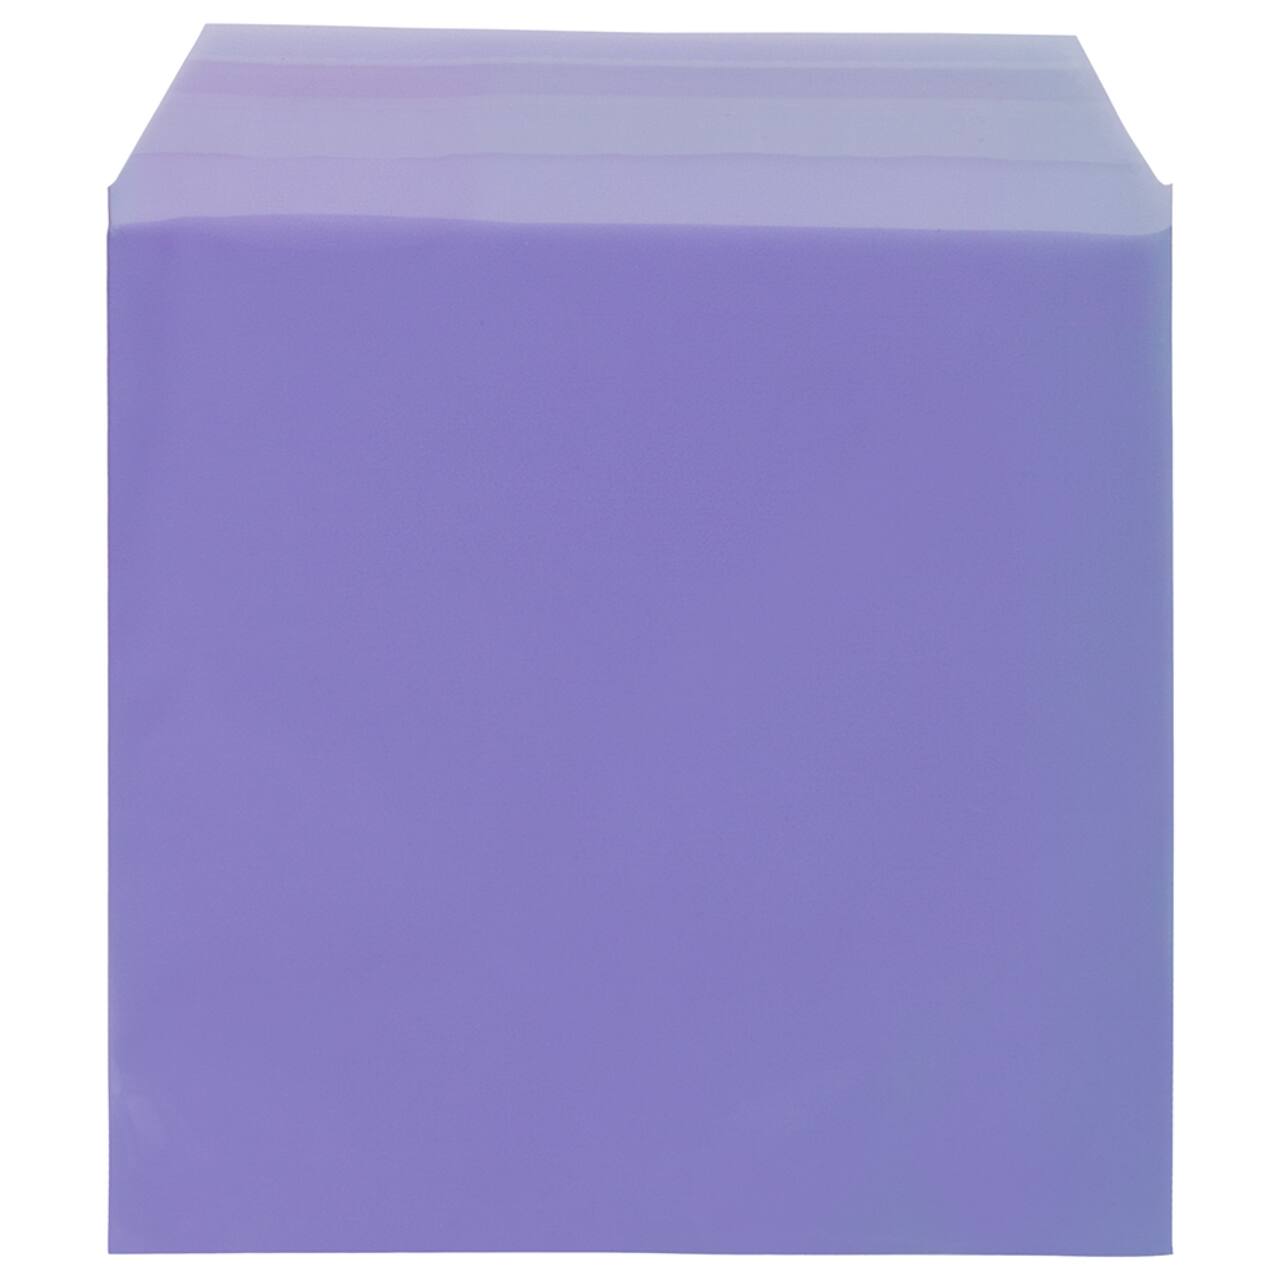 JAM Paper Purple Cello Sleeves With Self Adhesive Closure, 100ct.